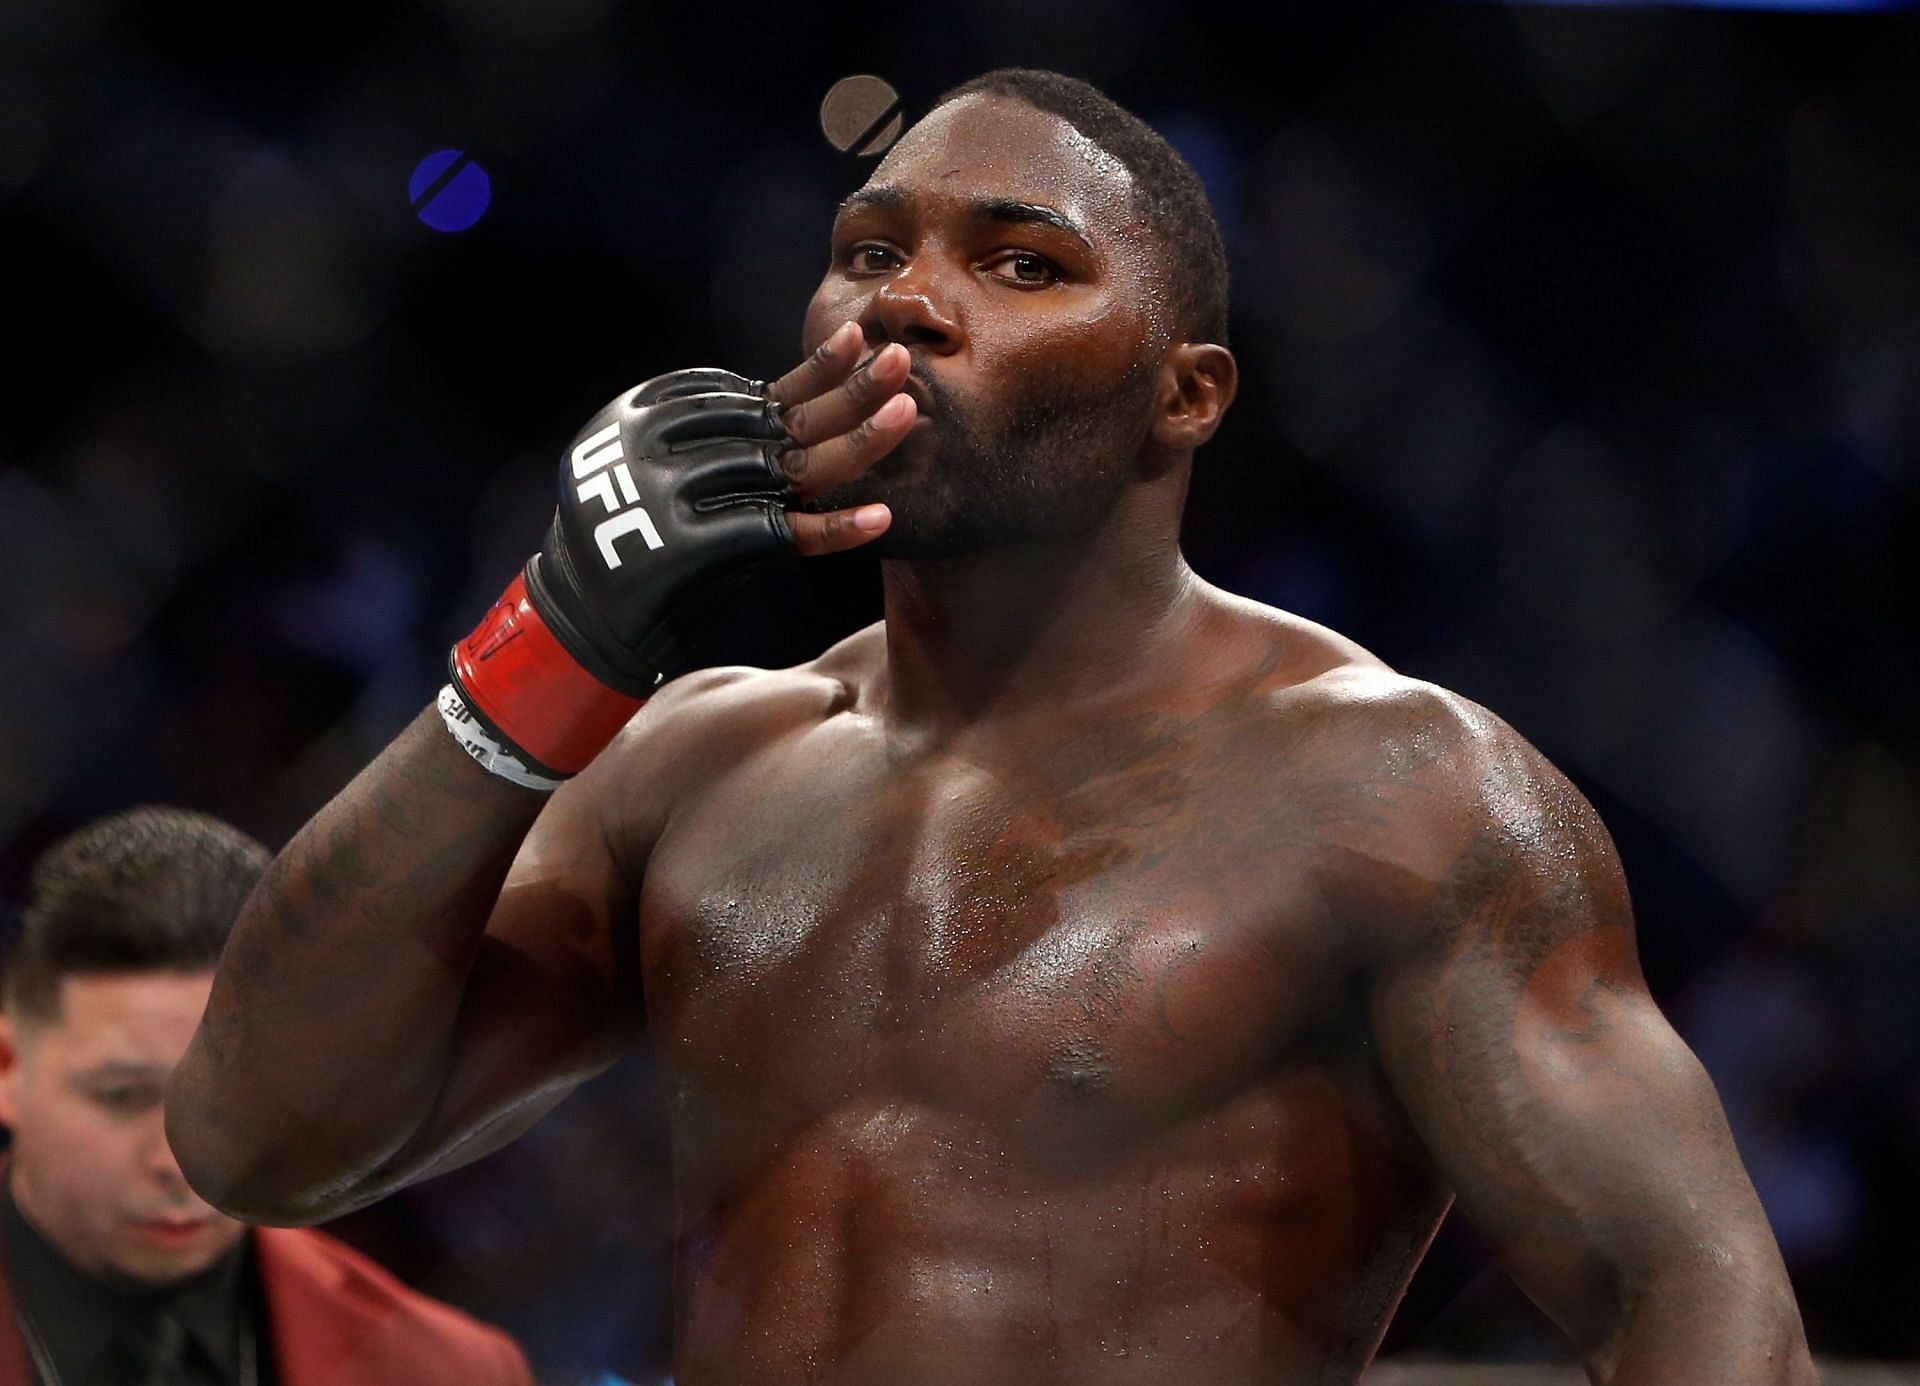 Anthony Johnson carried scary power in his punches